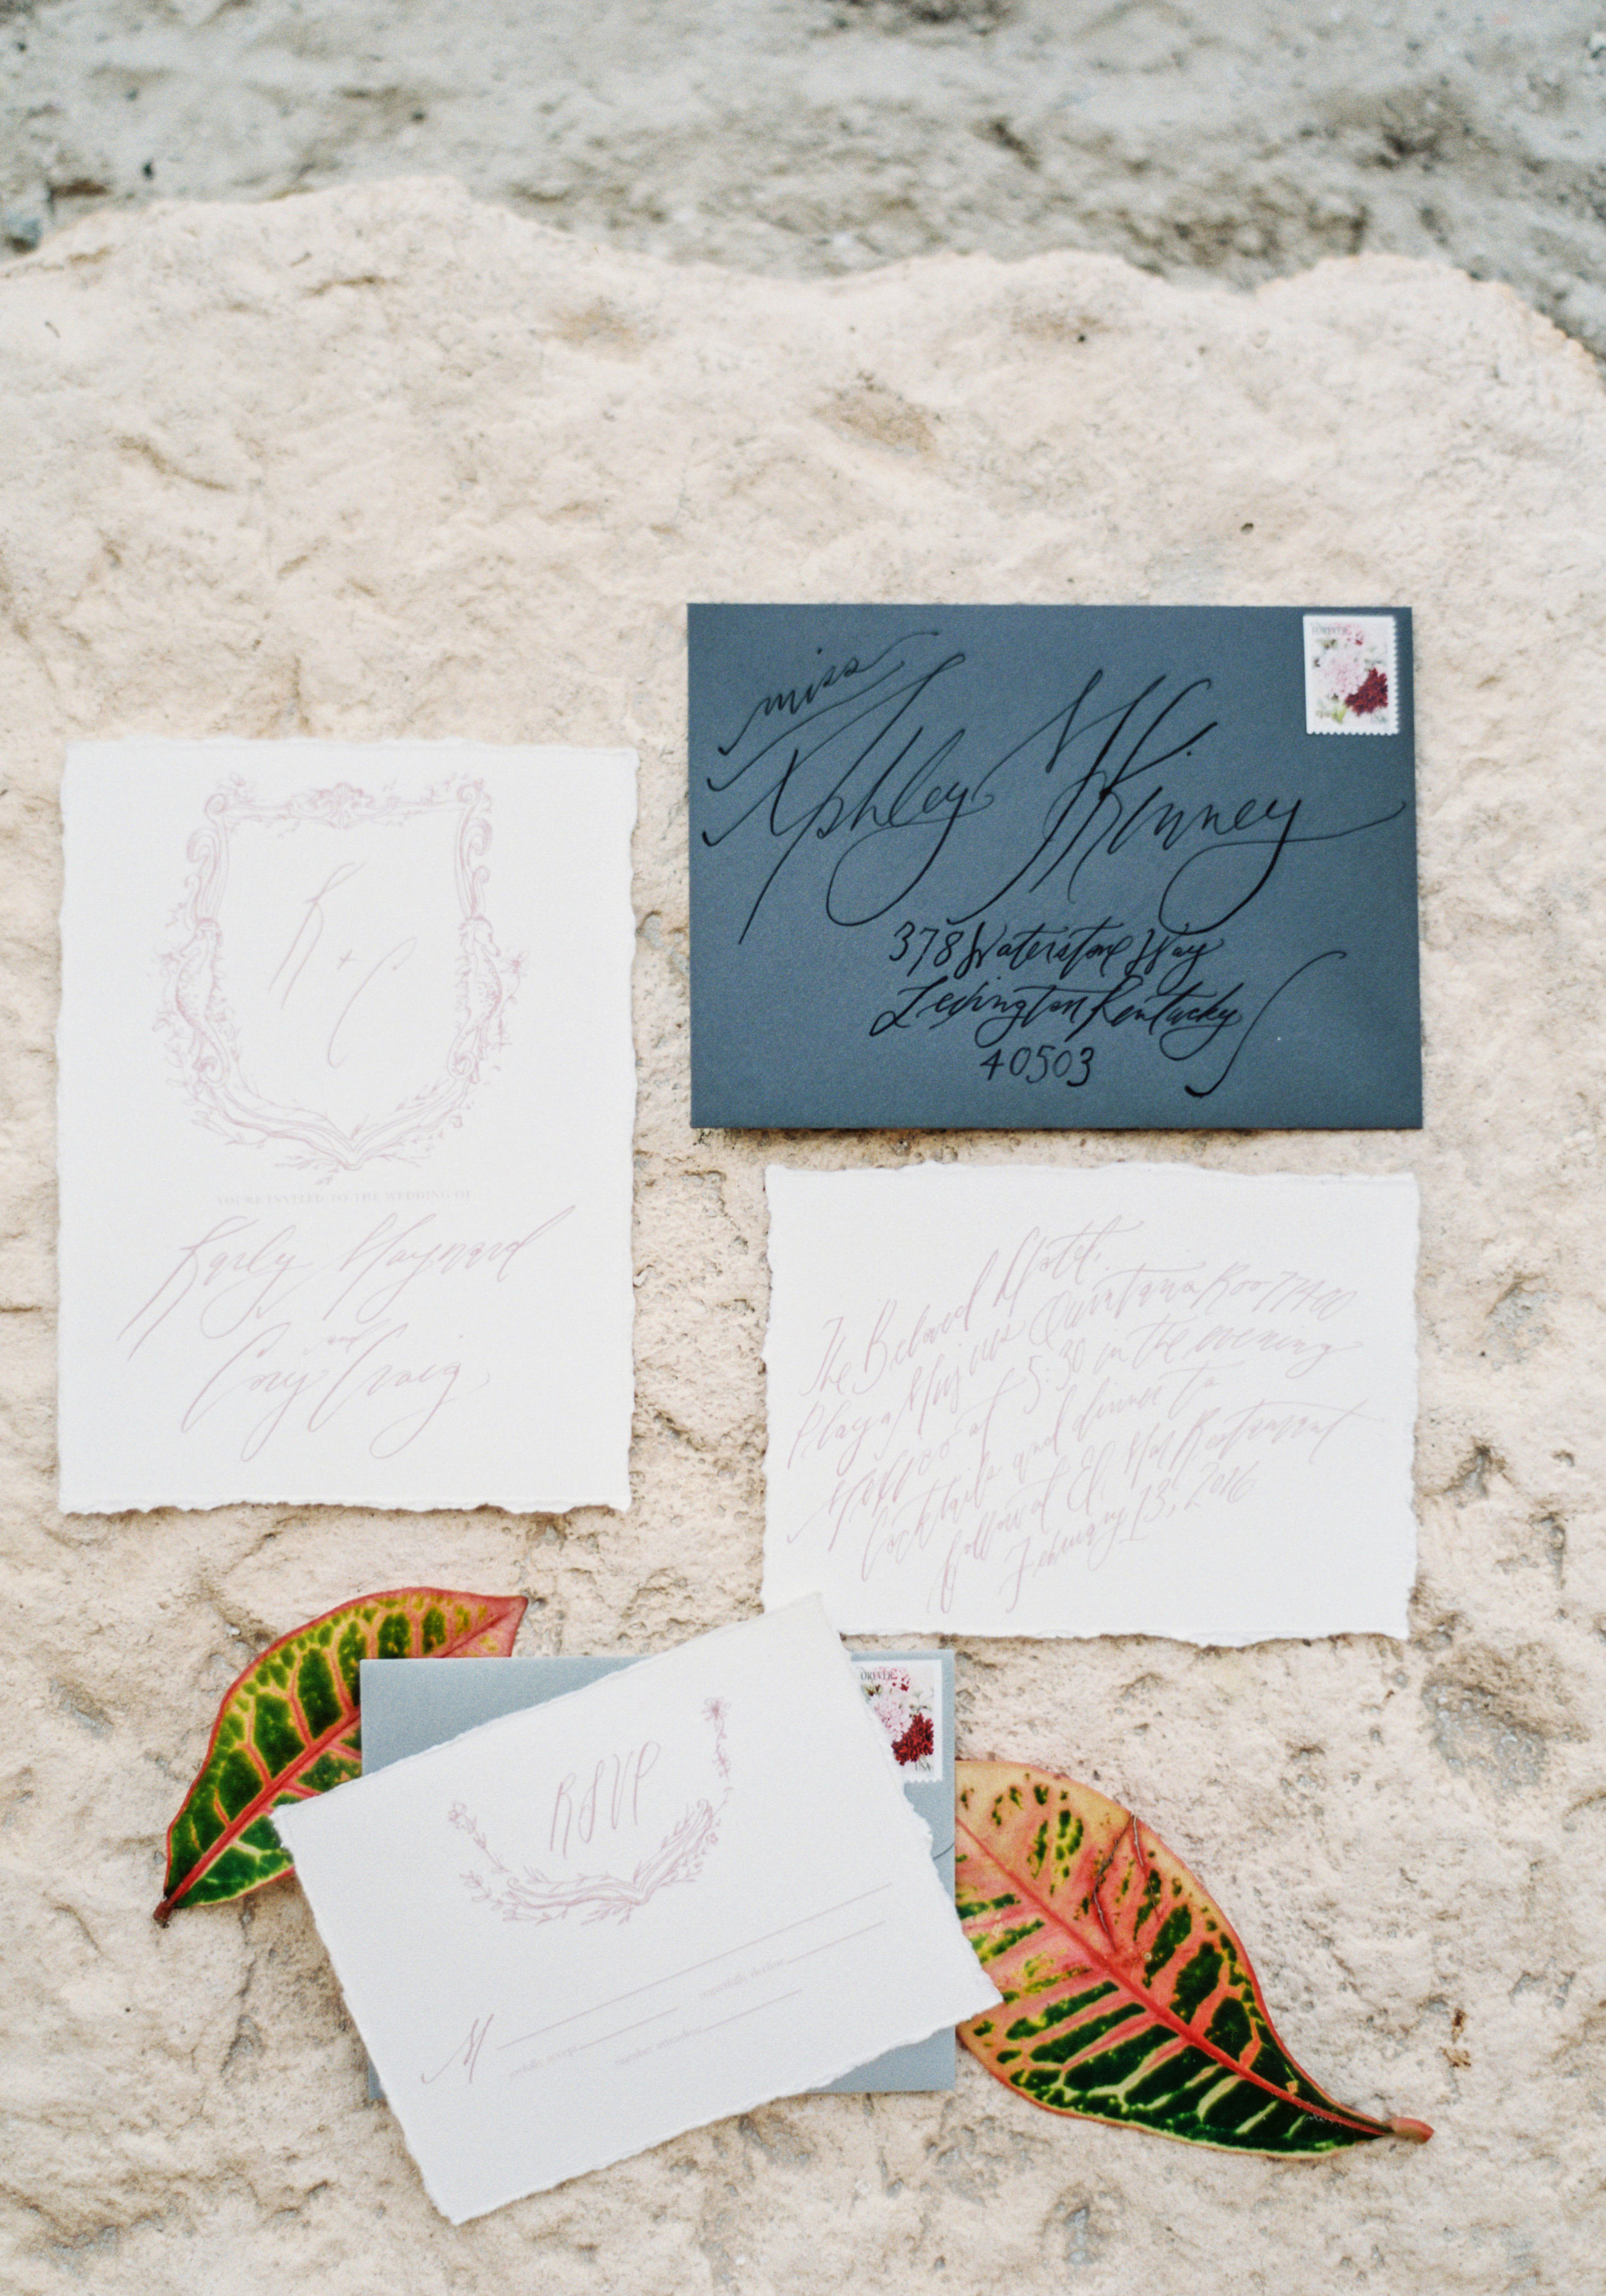 Blush and grey calligraphy invitation suite for a Mexico destination wedding on the beach. www.me-and-mrjones.com